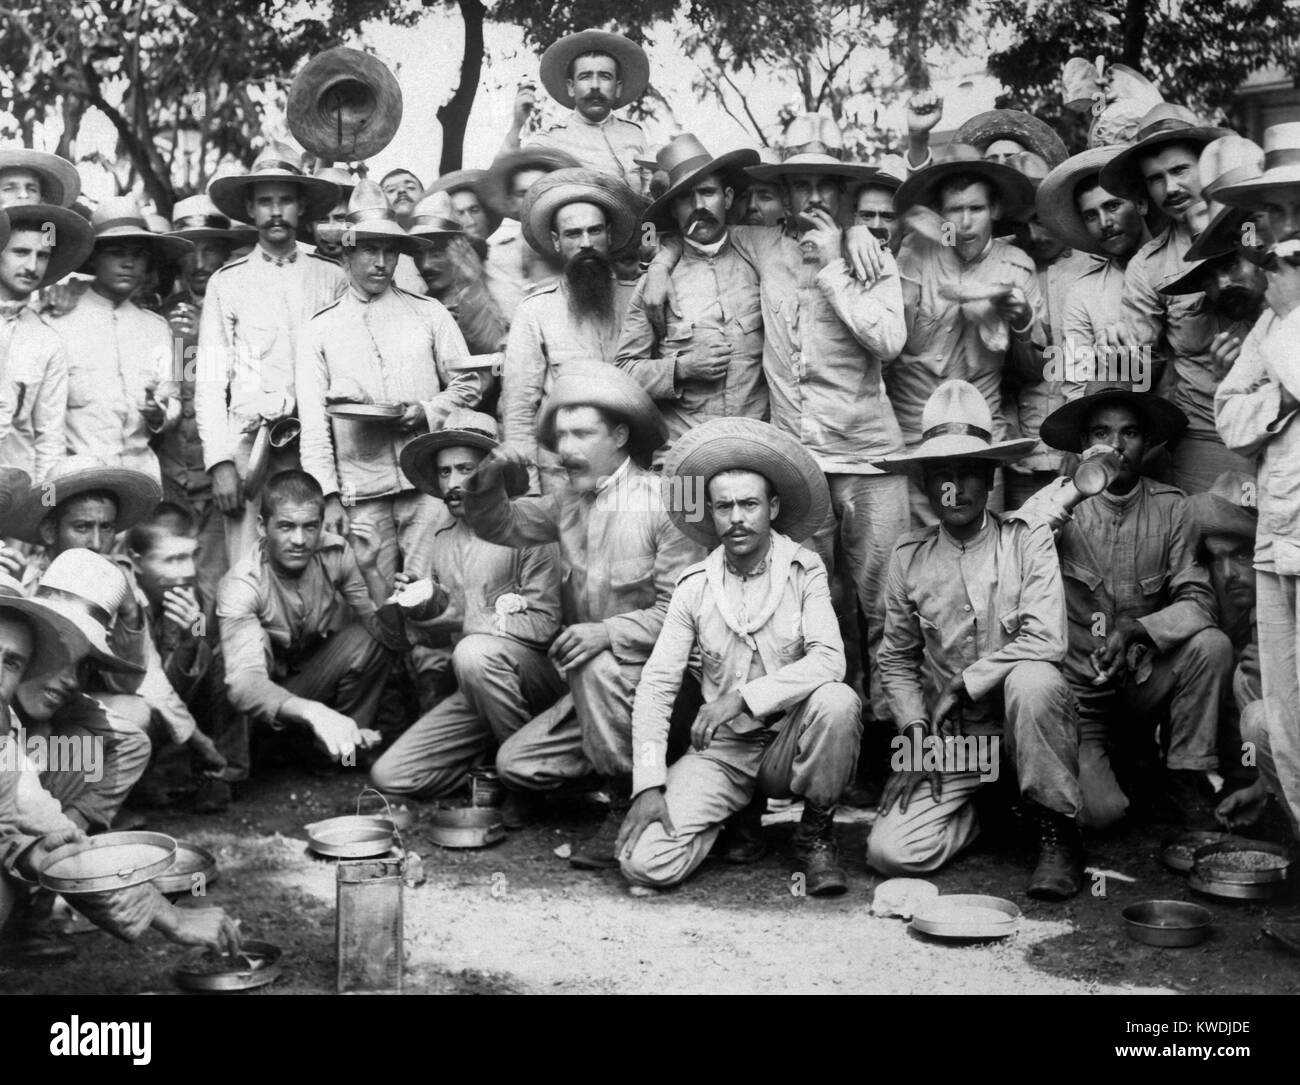 Spanish prisoners of war eating in US captivity in Manila, 1898. The Philippine revolutionary soldiers led by Emilio Aguinaldo turned over 15,000 Spanish POWs to the Americans in May-June 1898. Filipinos fought in the countryside as informal US allies against the Spanish, while the Deweys fleet awaited the arrival of US Expeditionary force (BSLOC 2017 10 67) Stock Photo